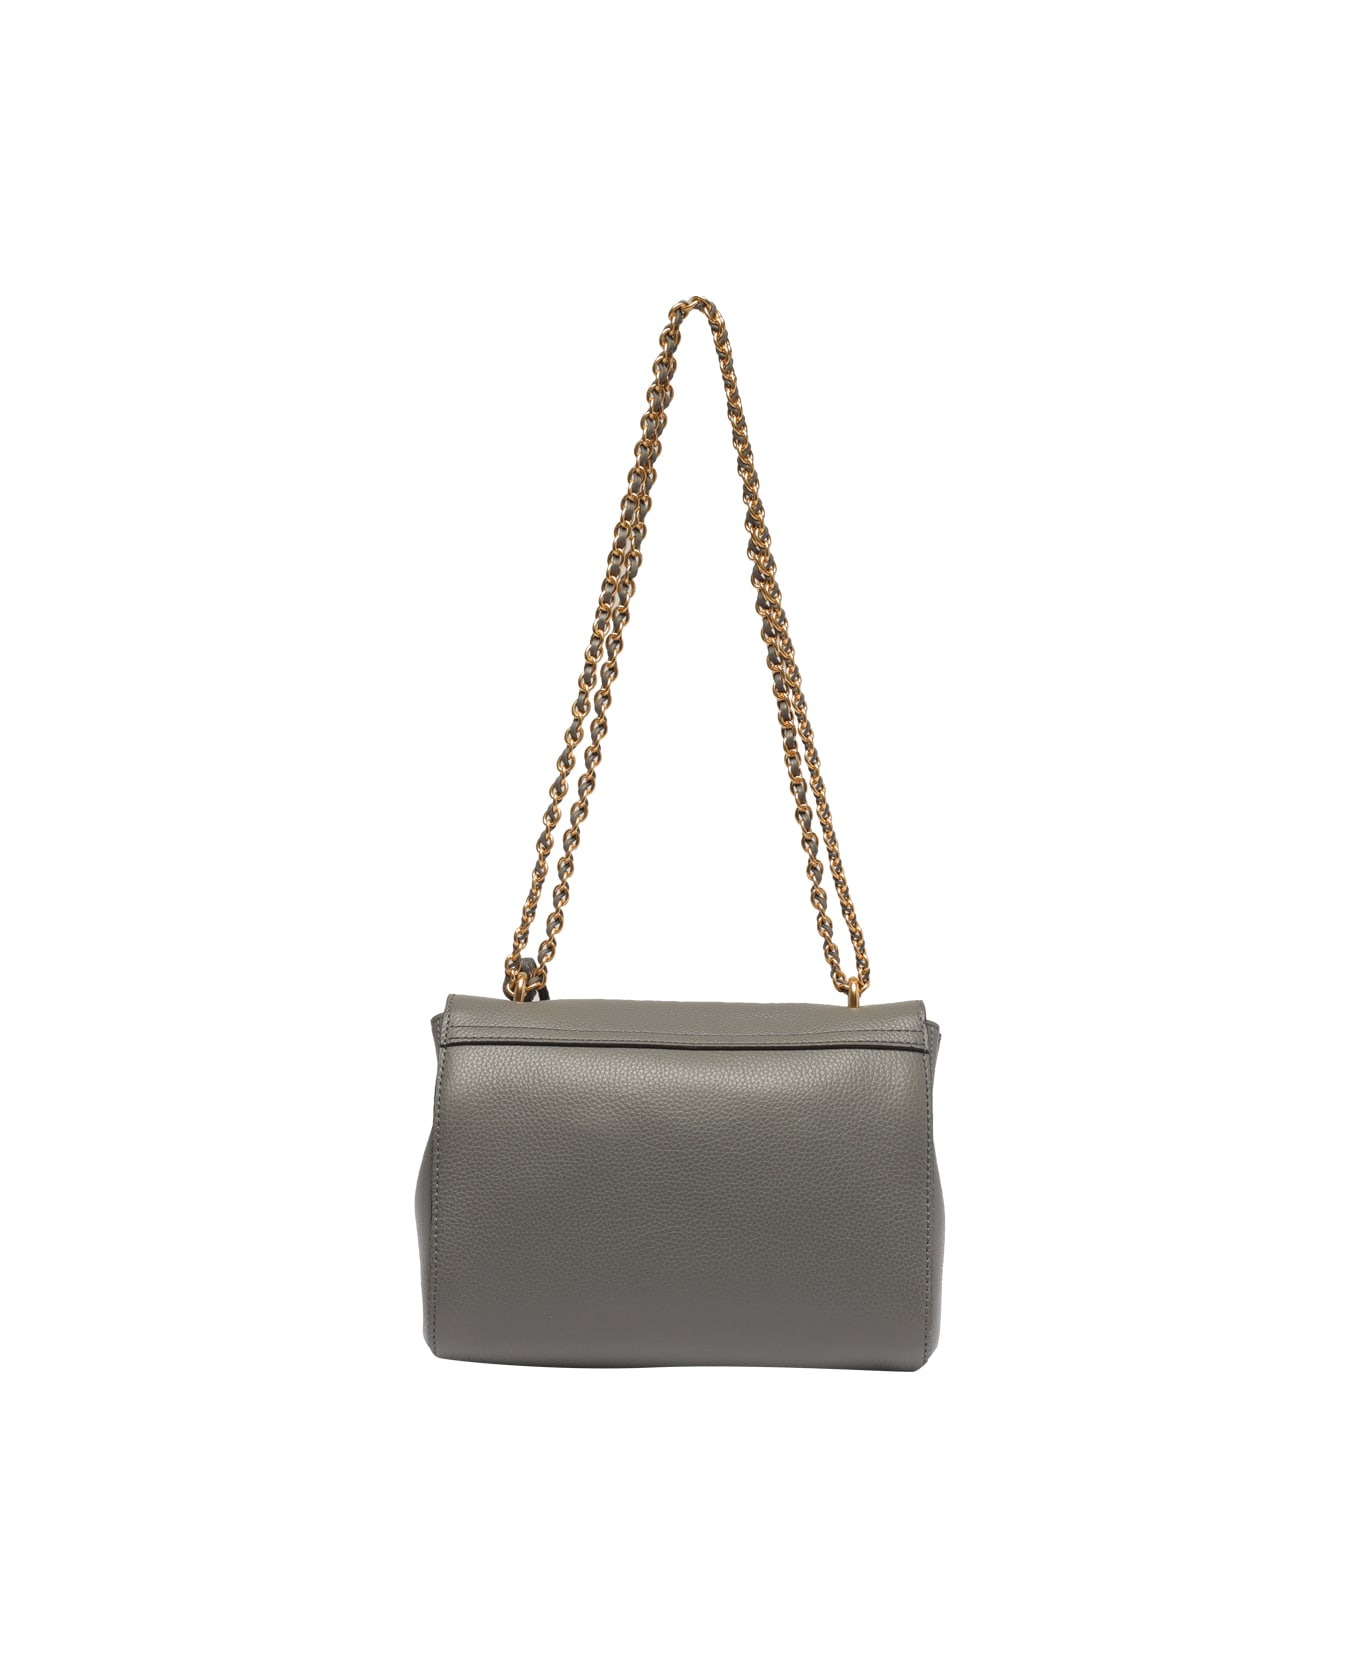 Mulberry Small Lily Shoulder Bag - Grey